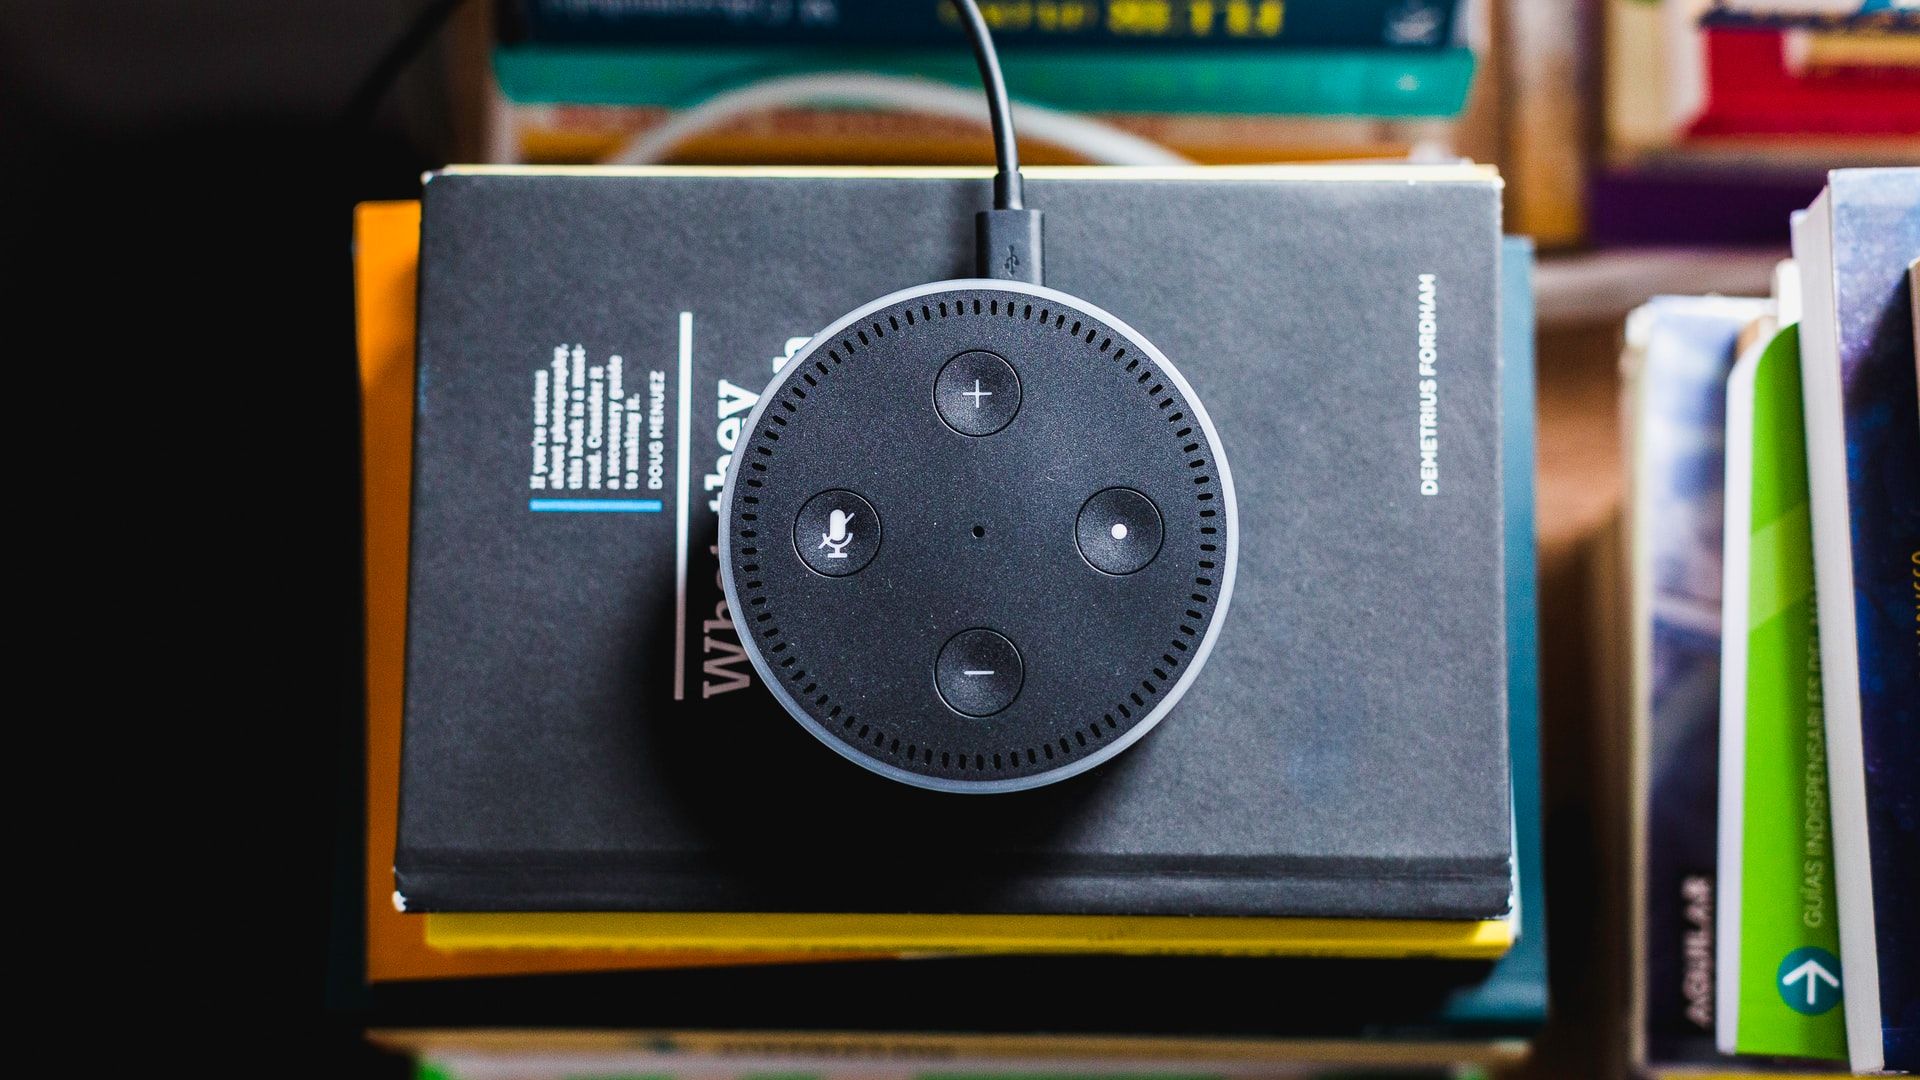 Amazon Echo on a pile of books